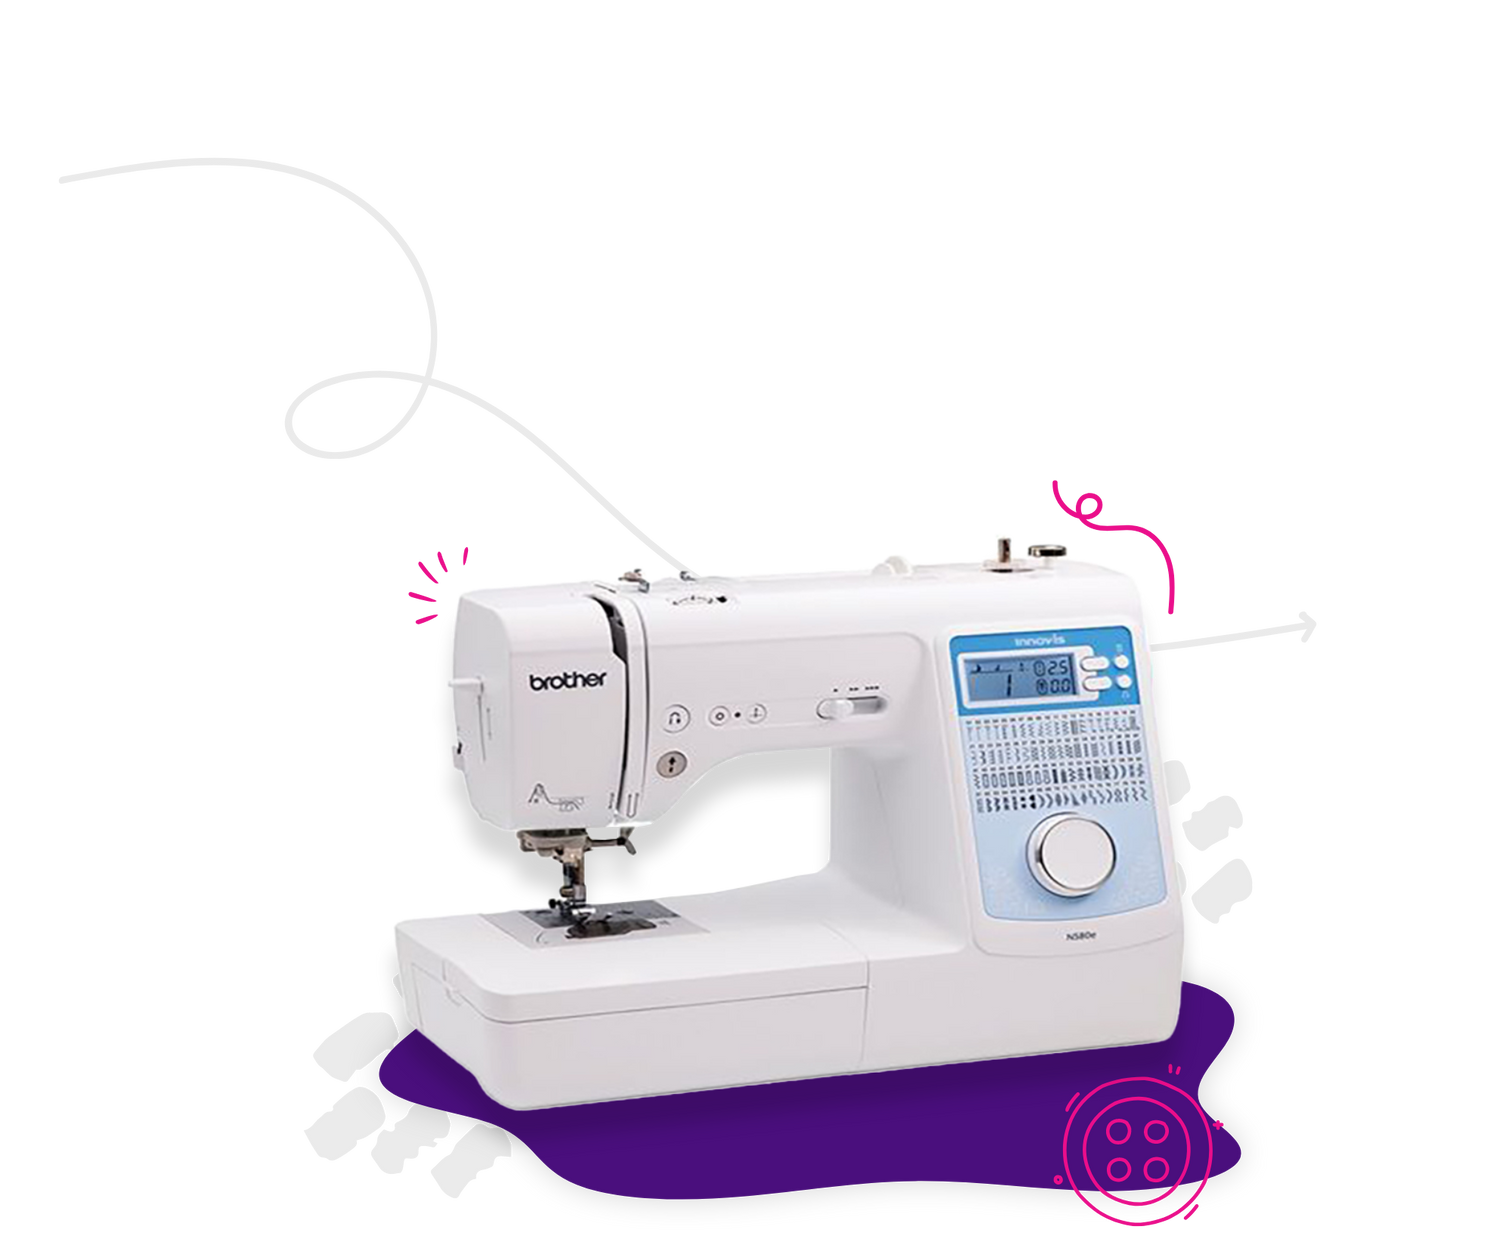 Sewing Furniture – Quality Sewing & Vacuum